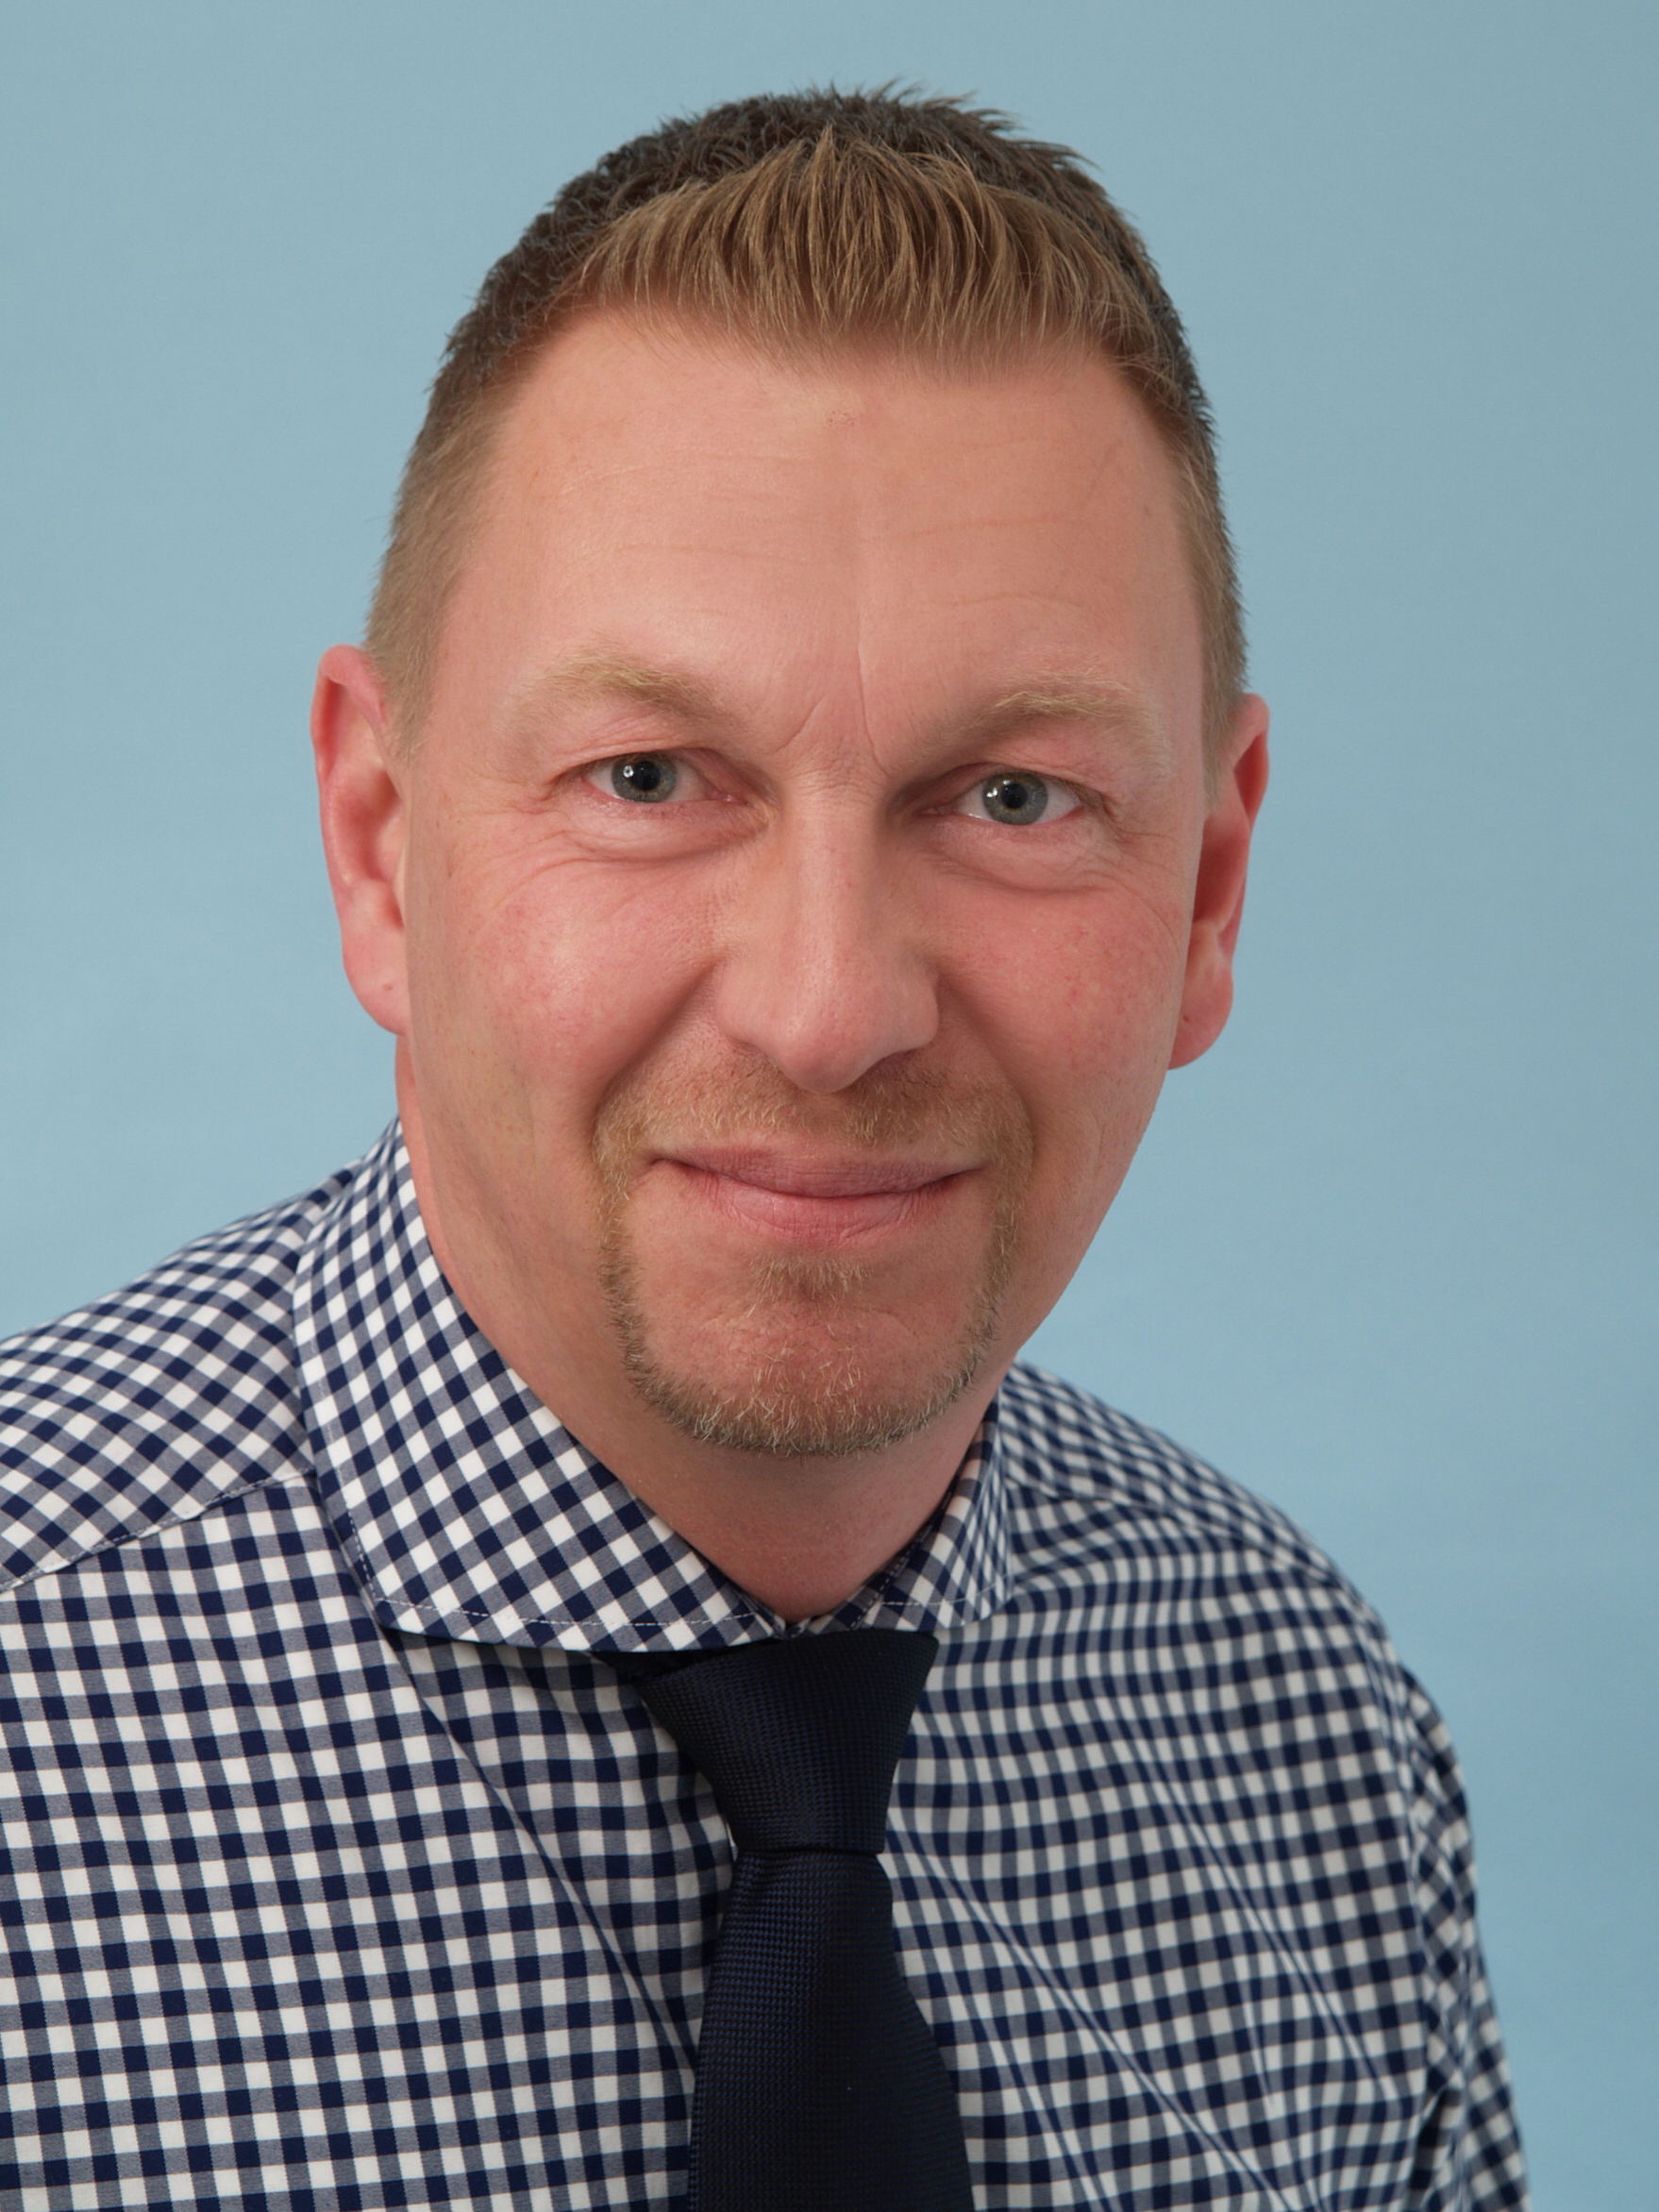 Markus Röllinghoff has been appointed as Gast Group's new regional sales manager